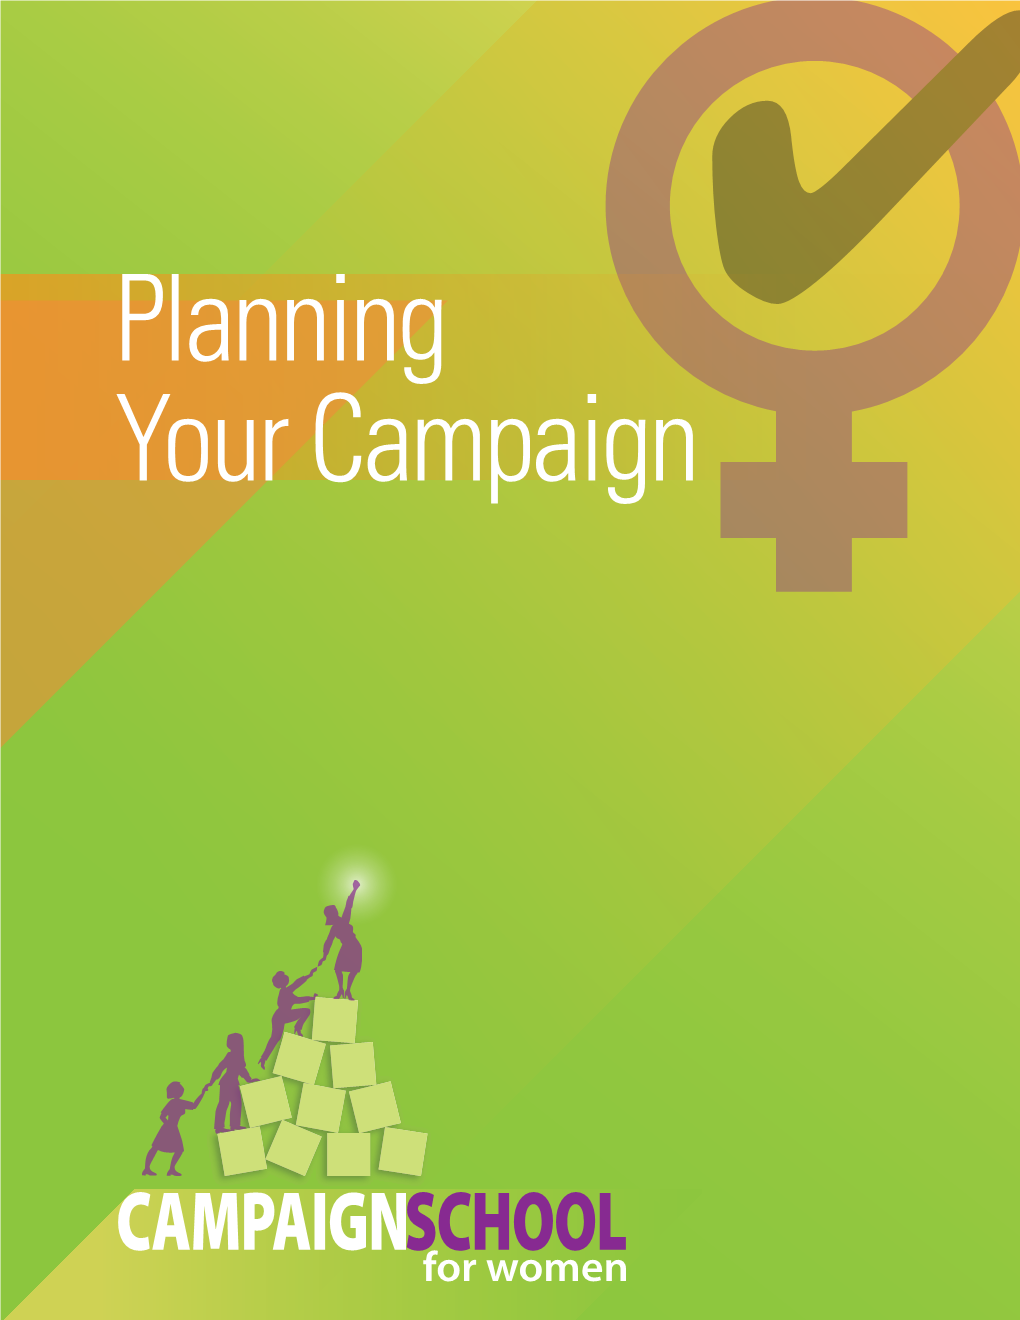 Planning Your Campaign Introduction